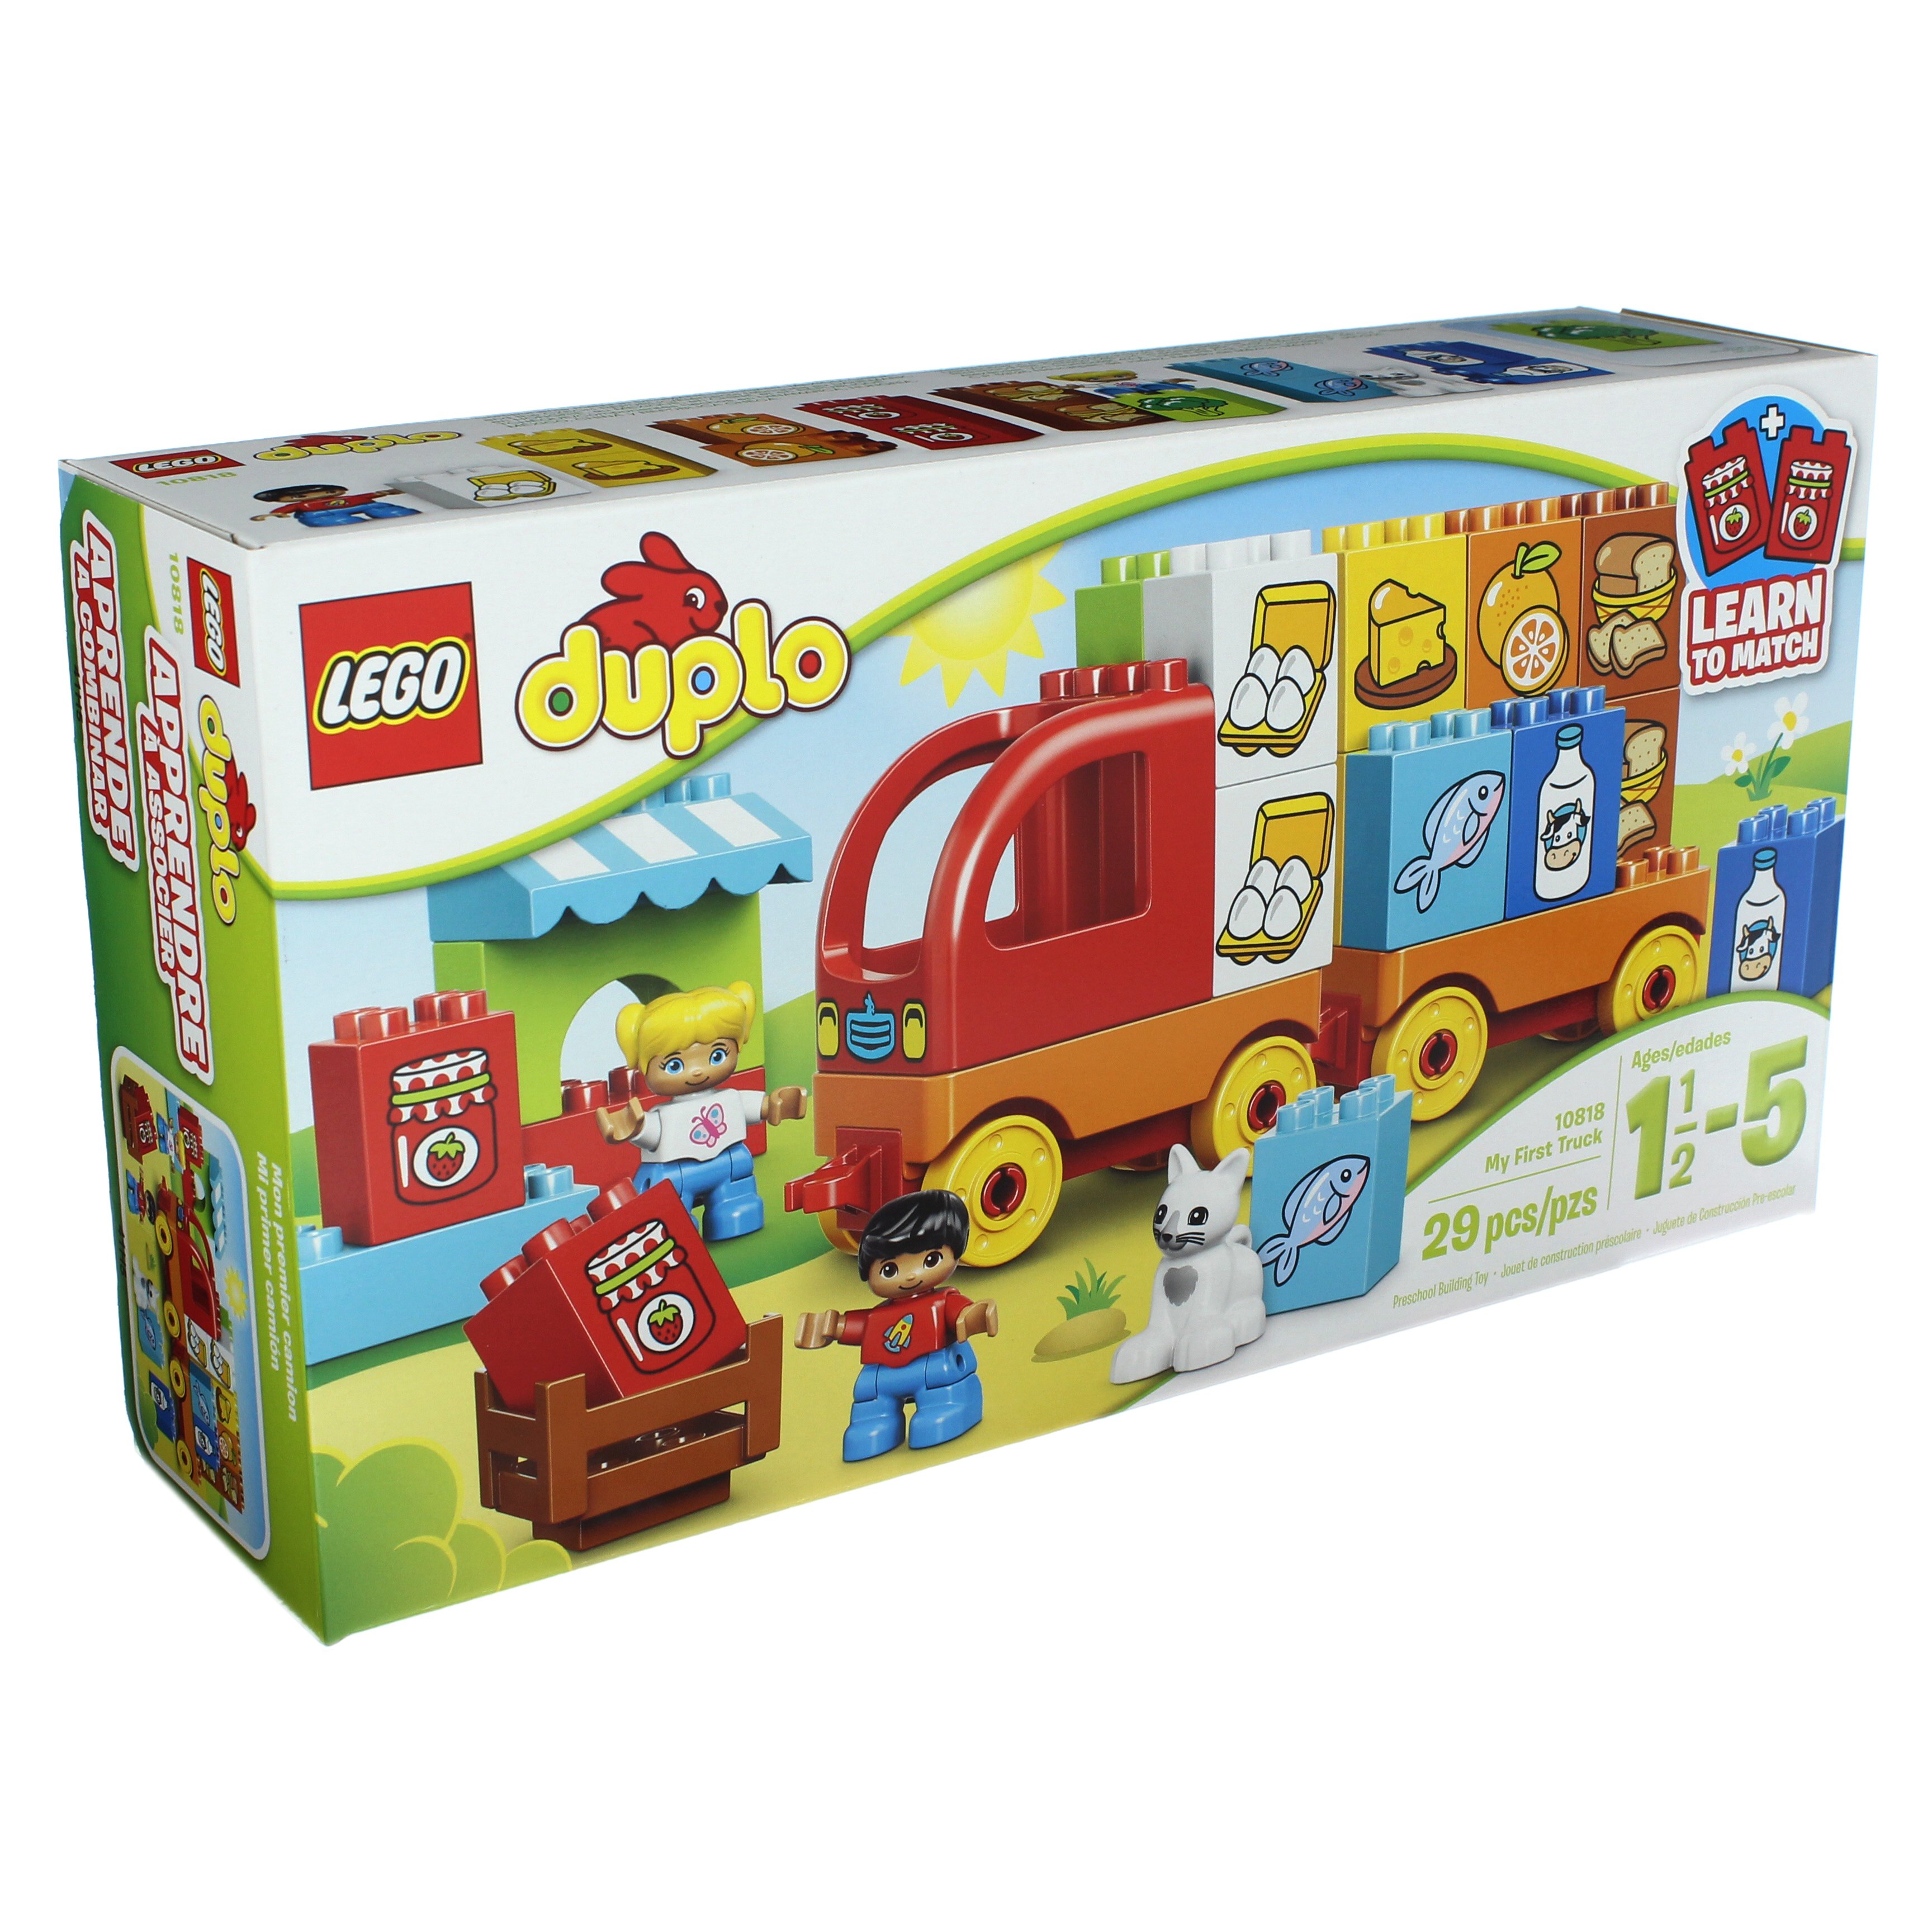 LEGO Duplo My Truck - at H-E-B